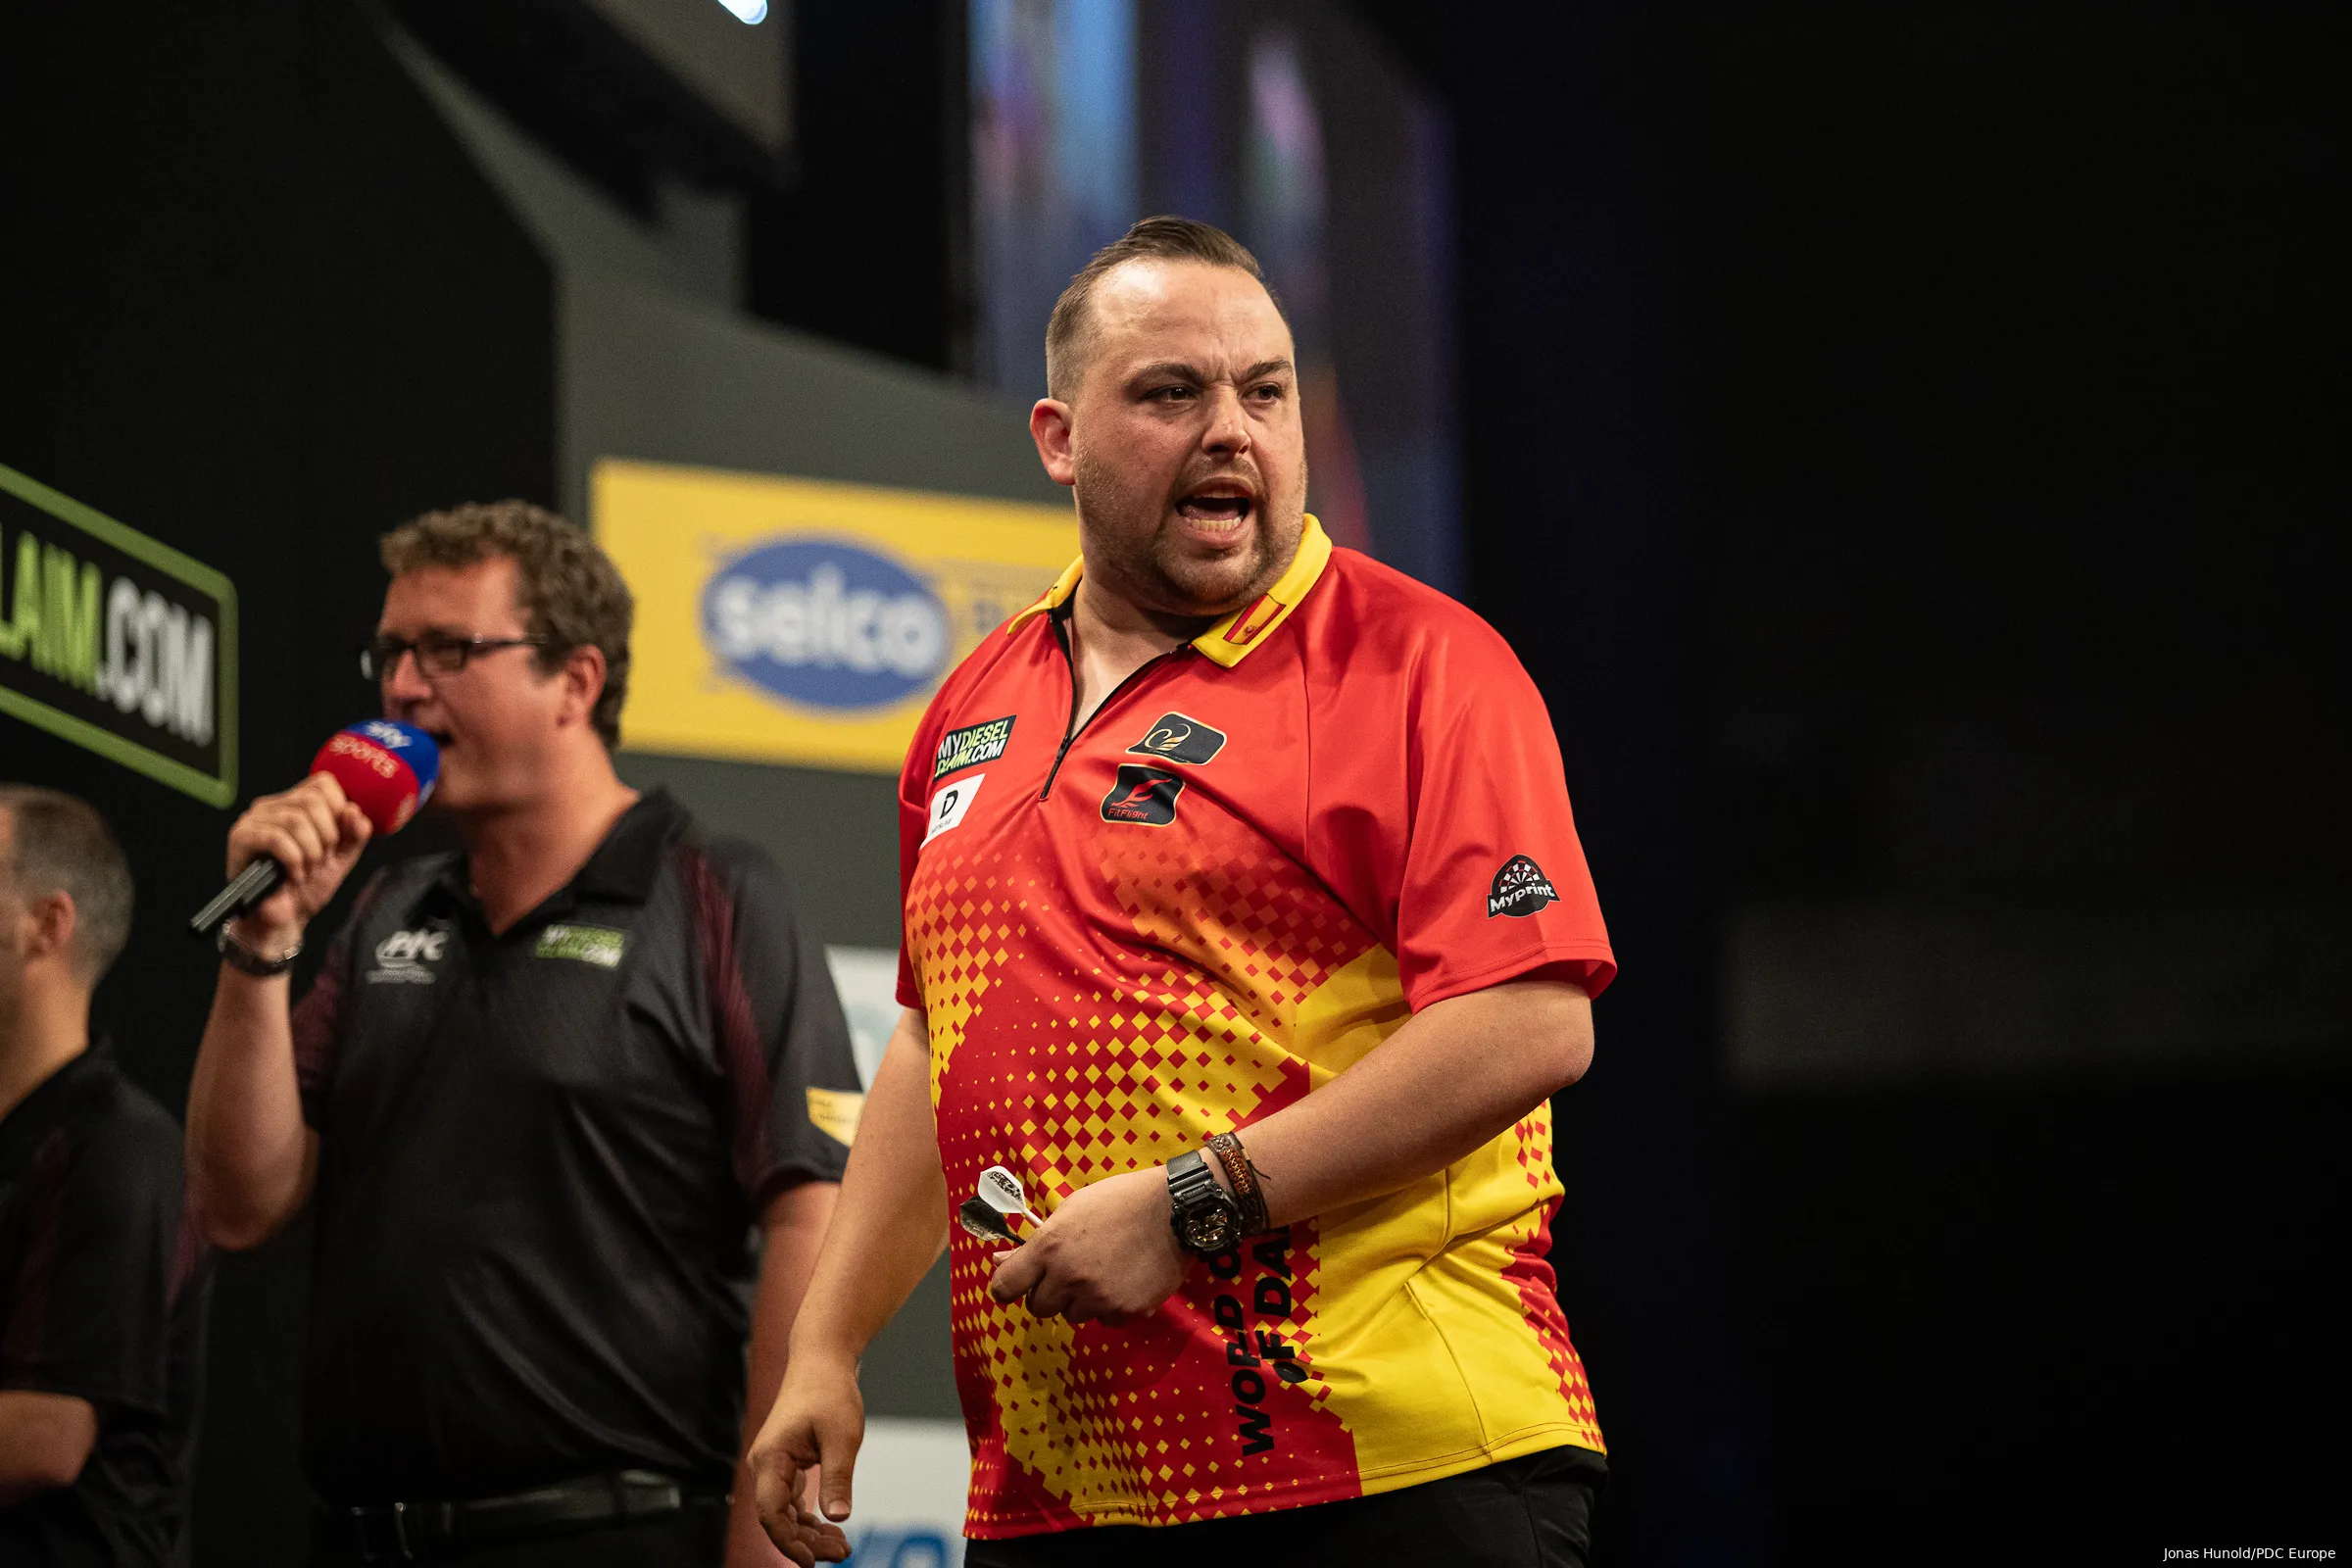 world cup of darts 2023 2023wcg4 spain4